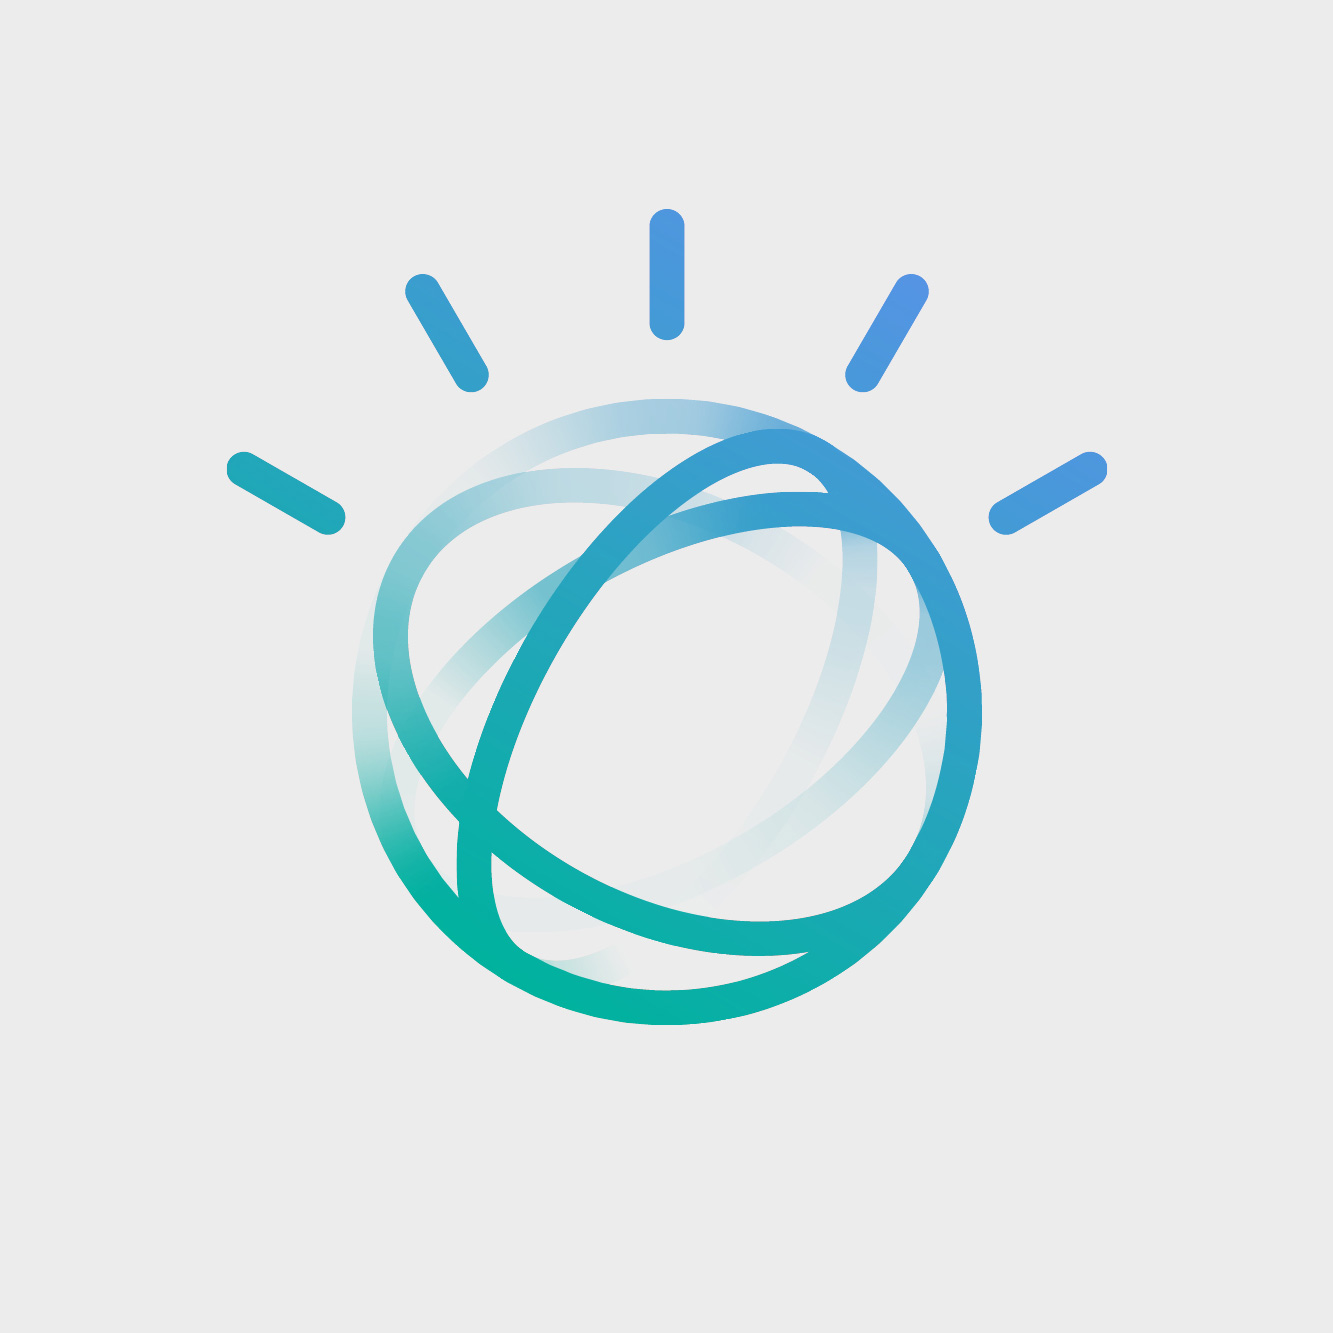 Brand New: New Logo and Identity for IBM Watson done In-house (with others)